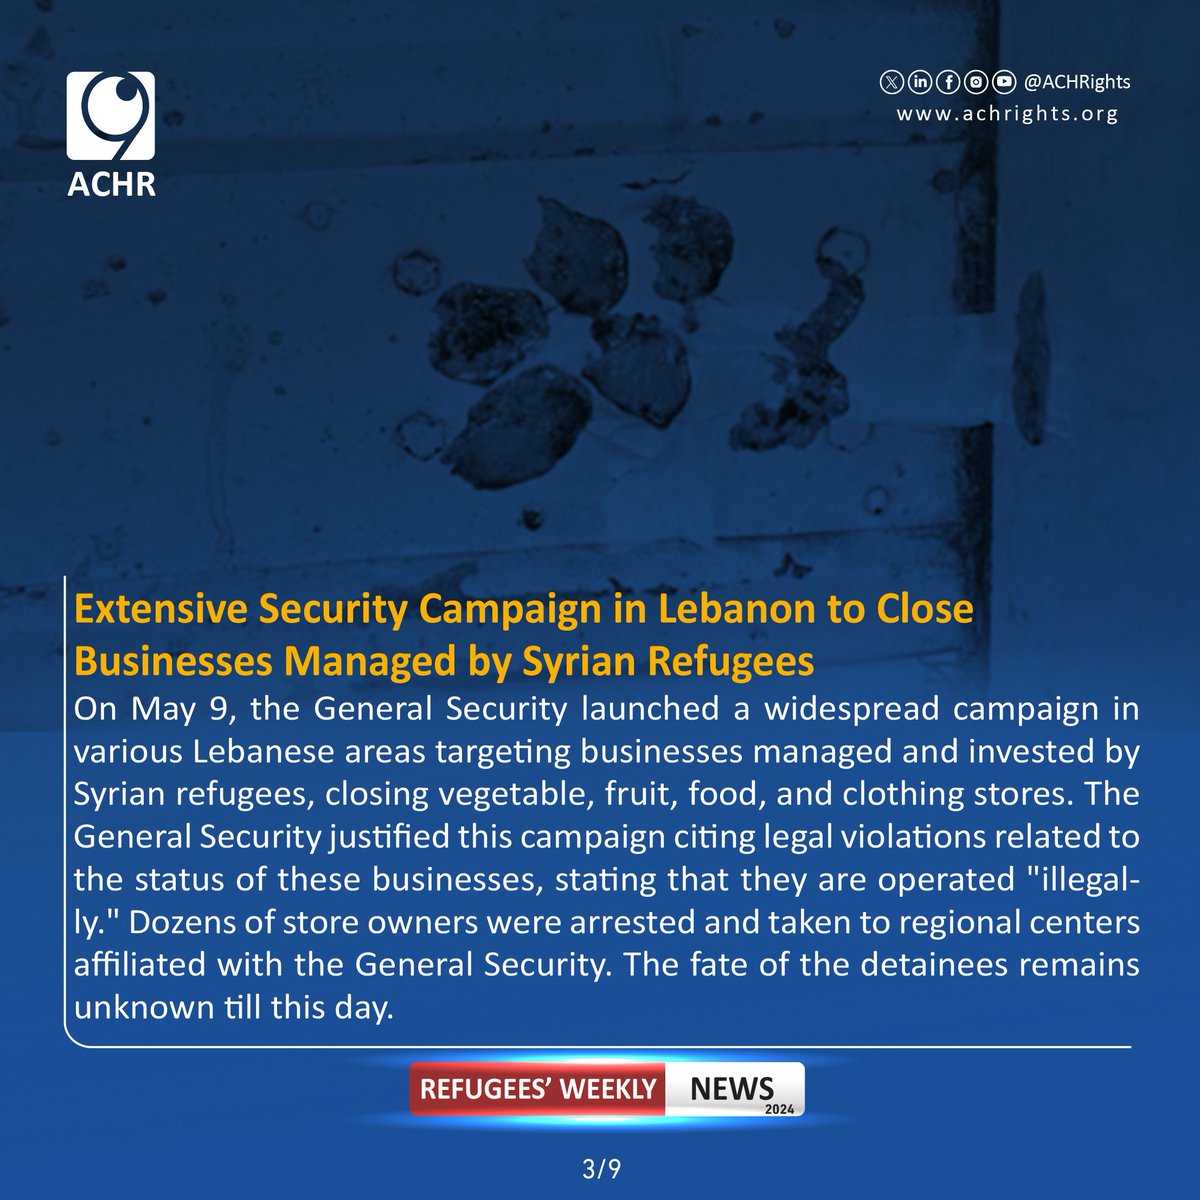 Extensive Security Campaign in Lebanon to Close Businesses Managed by Syrian Refugees.
#Together_for_Human_Rights #weeklynews #violations #humanrights #syrianrefugees #lebanon #syria #RefugeesRight